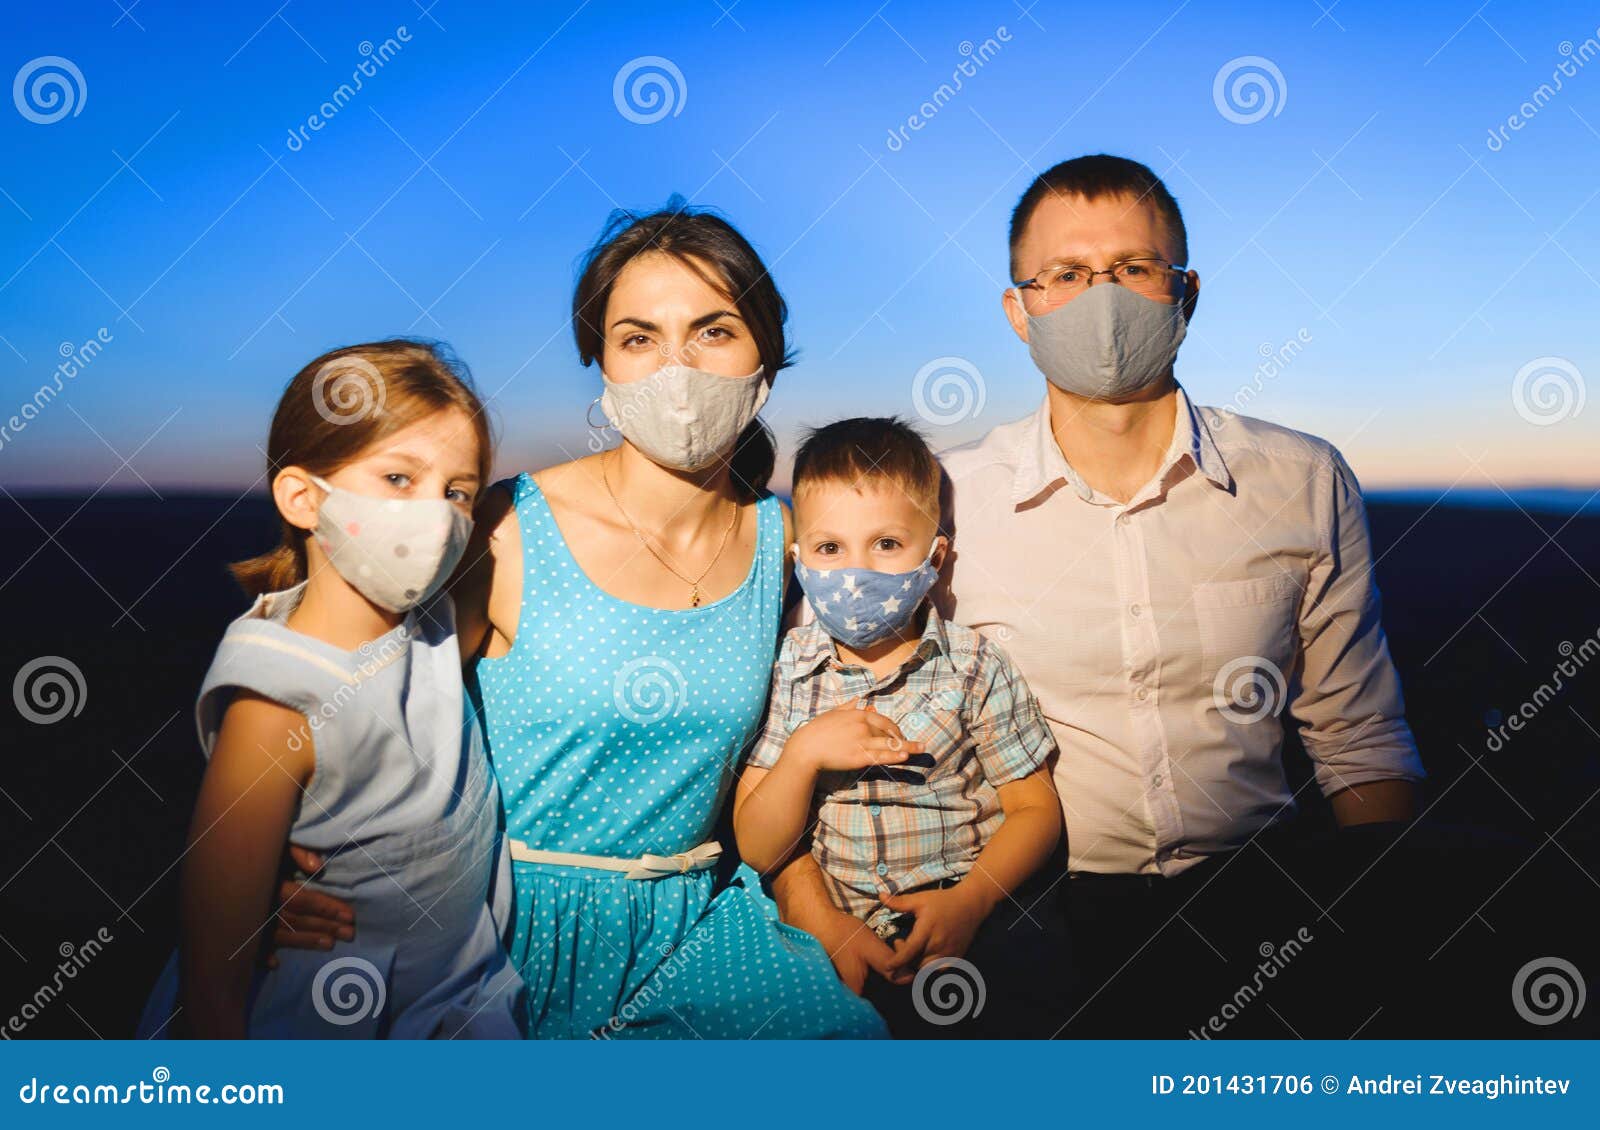 family in masks during pandemia